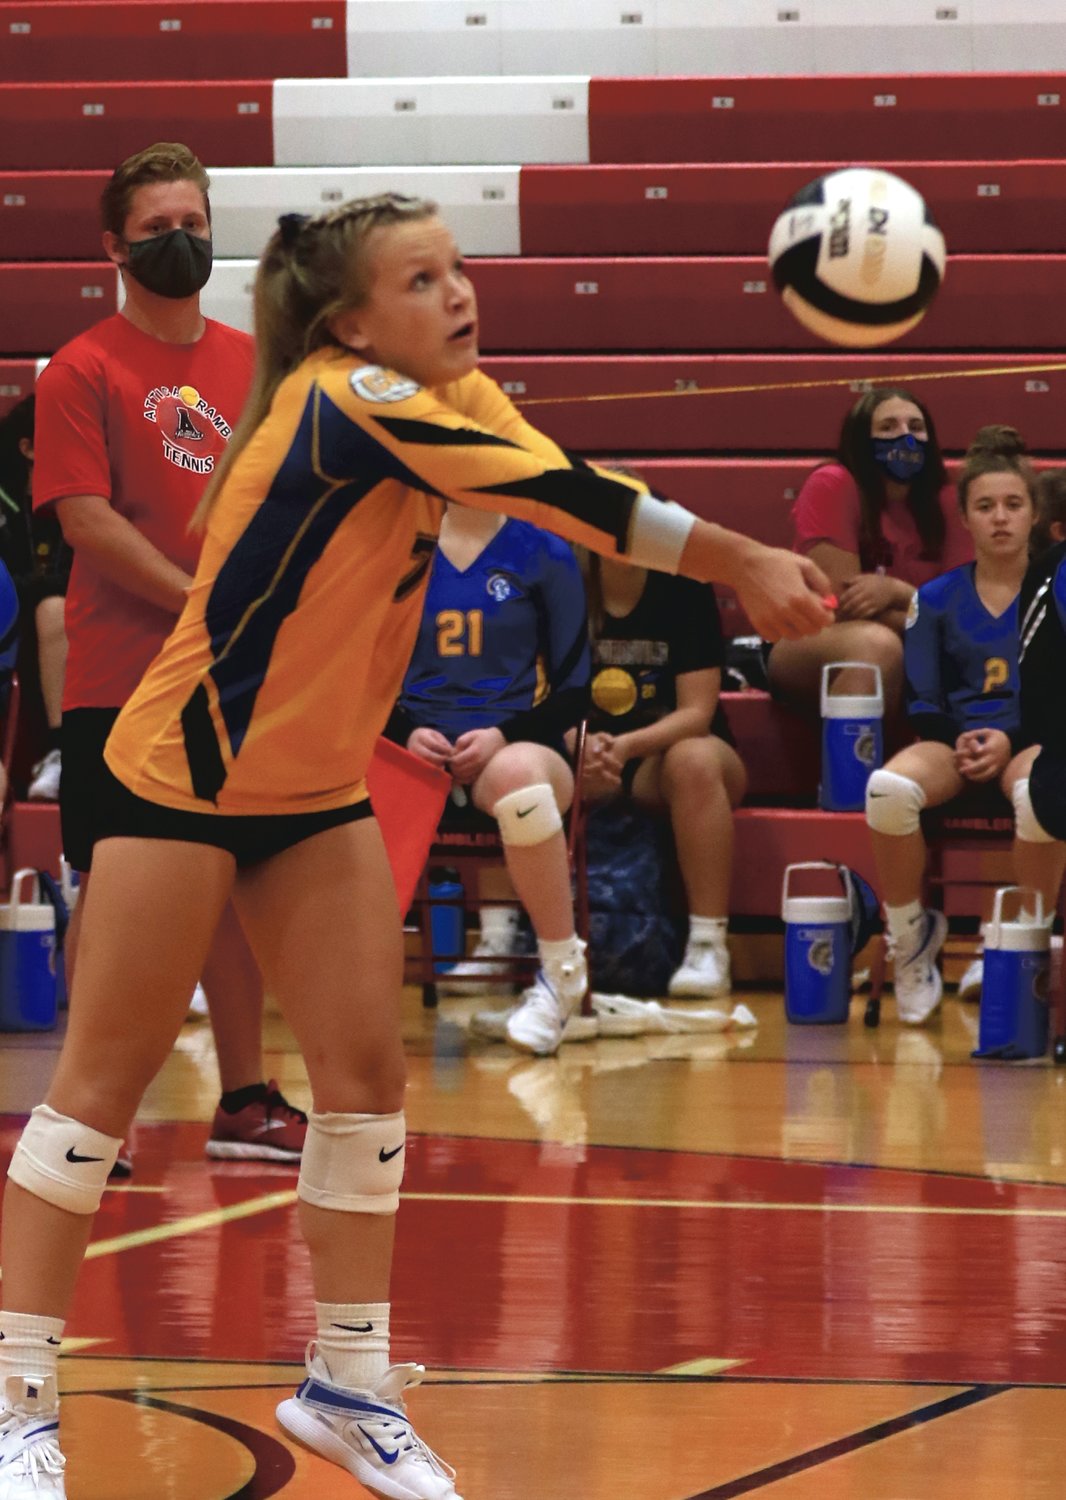 Olivia reed returns a ball for Crawfordsville against Attica on Thursday night.